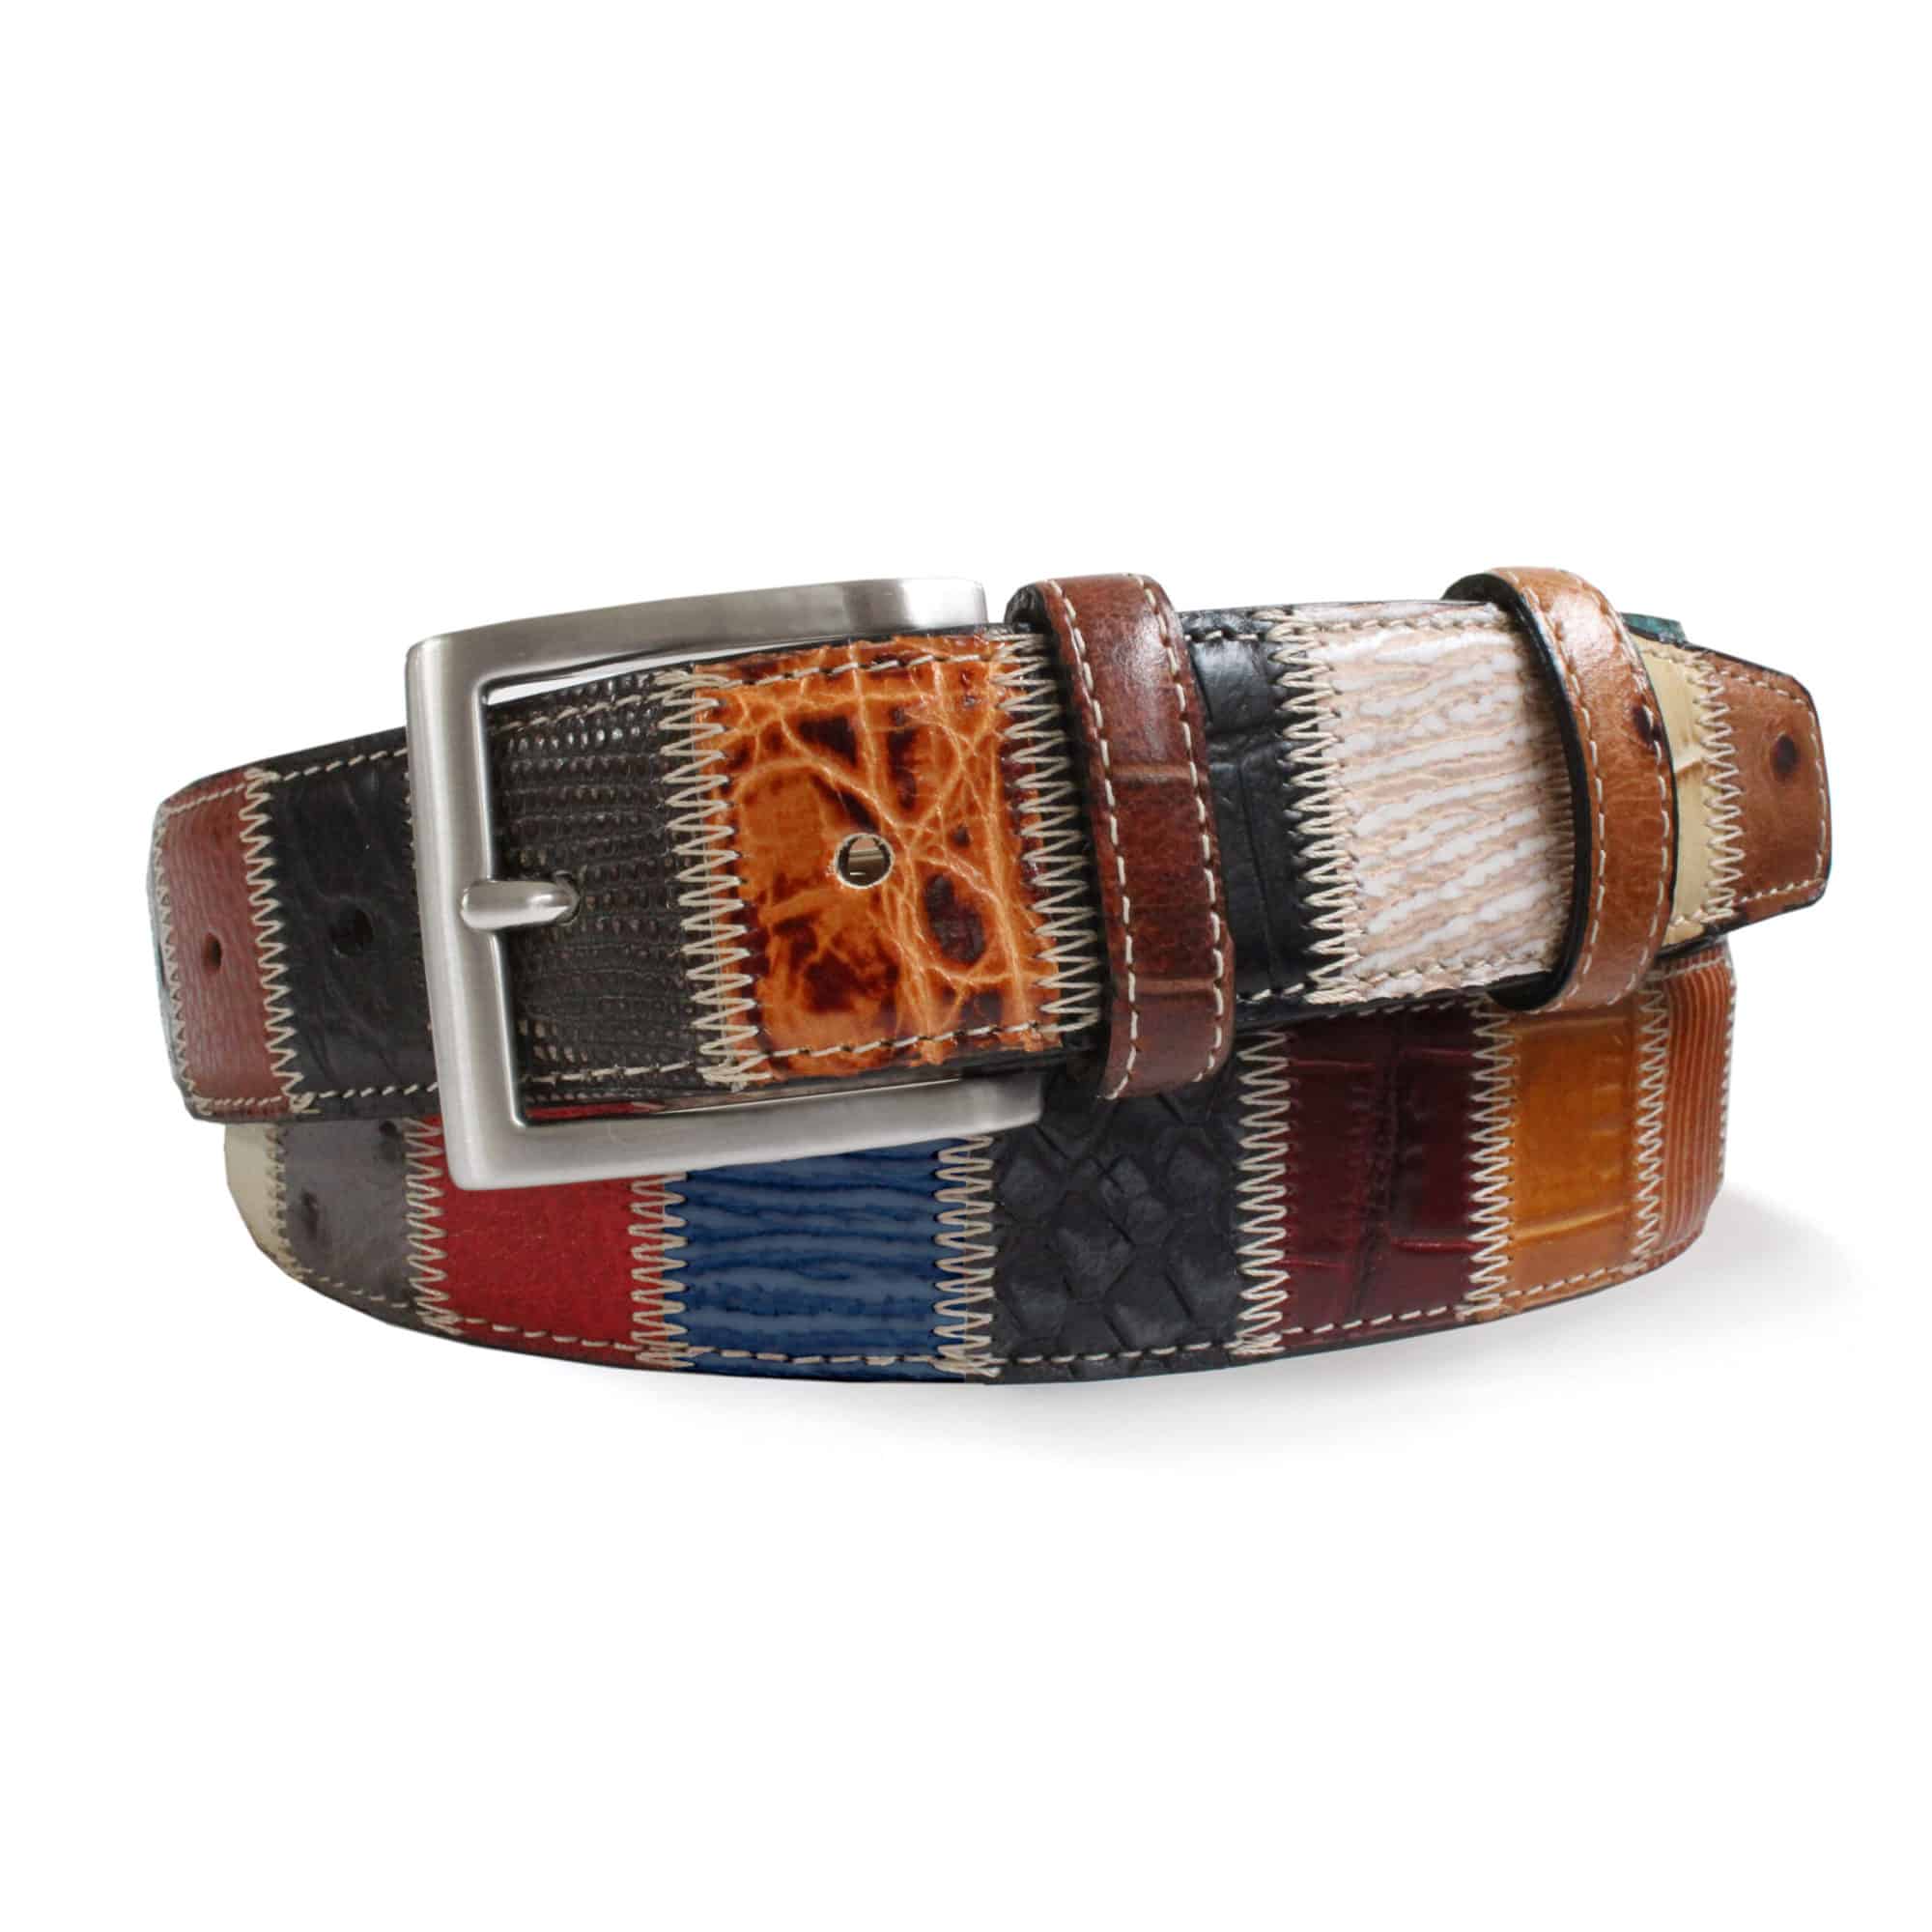 Multi Patchwork Belt by Smart Clothes York Yorkshire